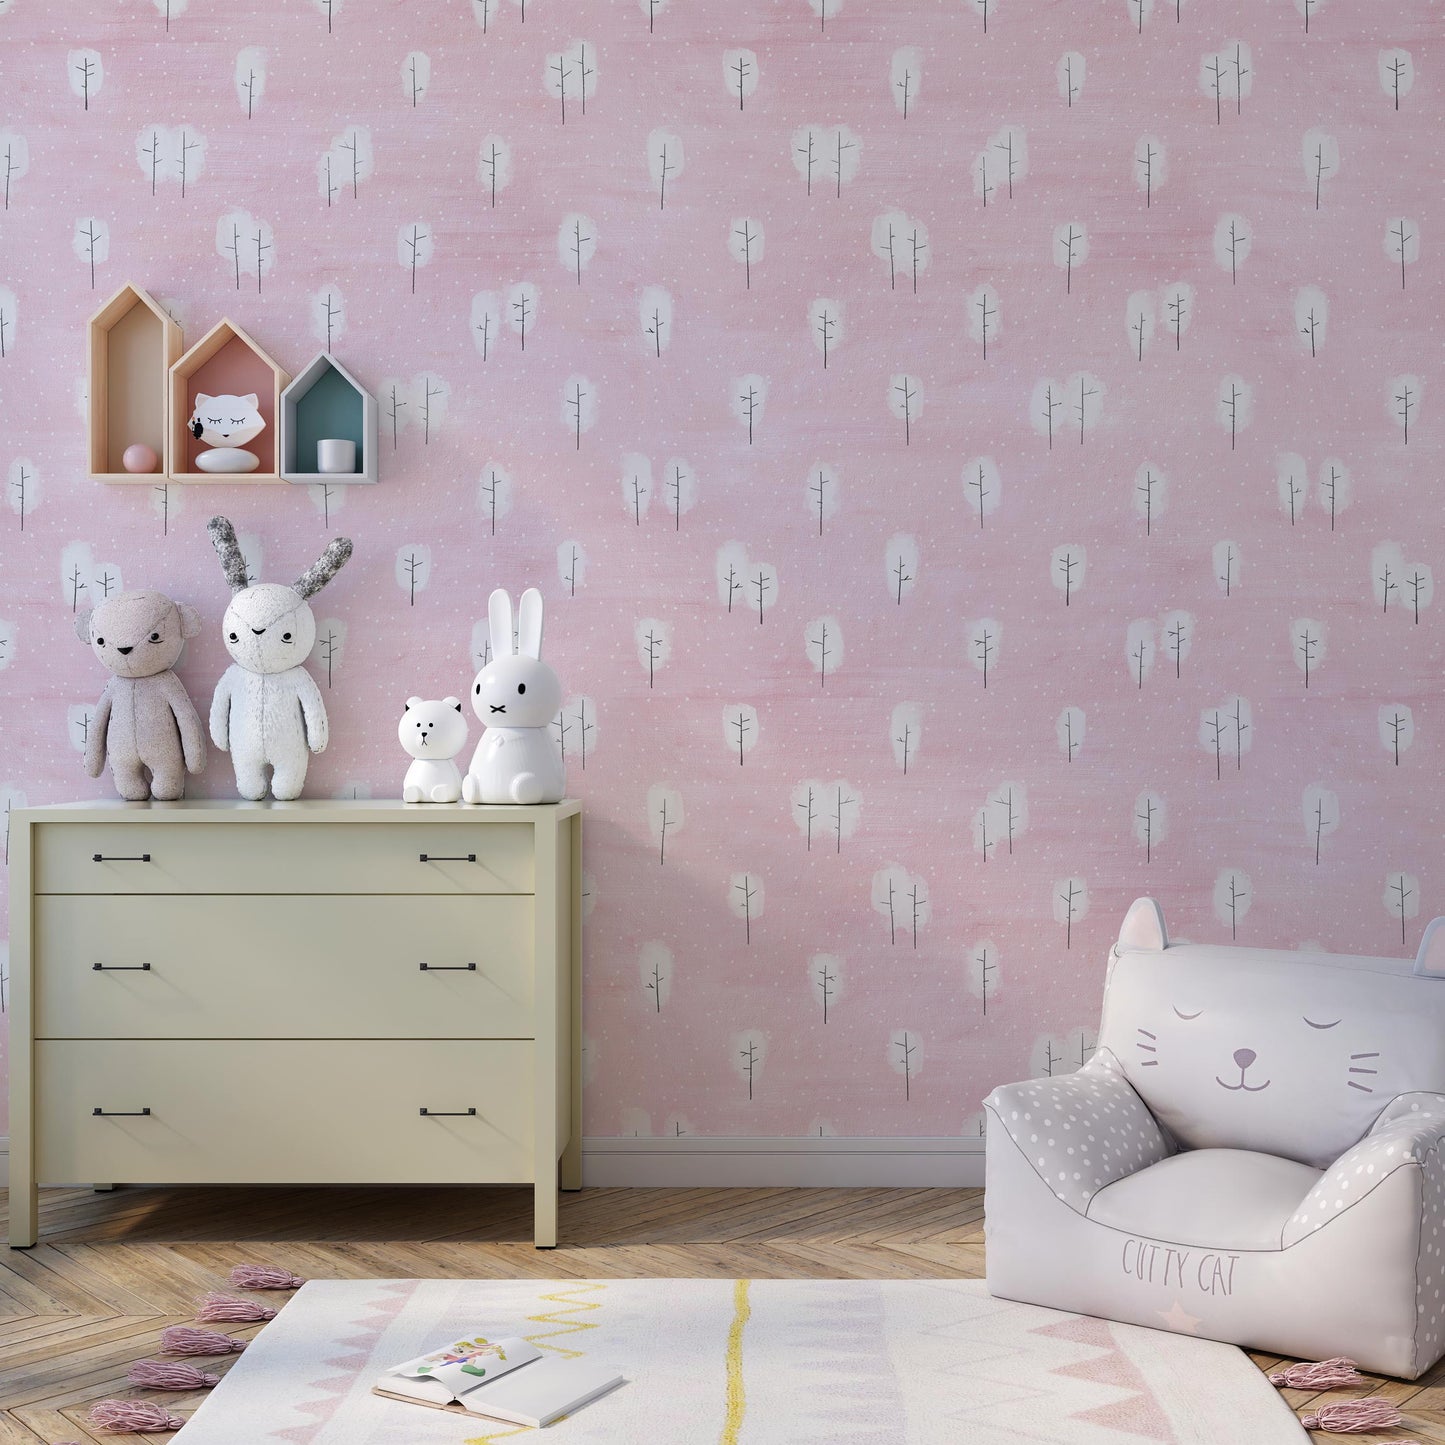 Enchanted Skies Nursery Wallpaper: Removable Pink & Tree Design for Girls' Room